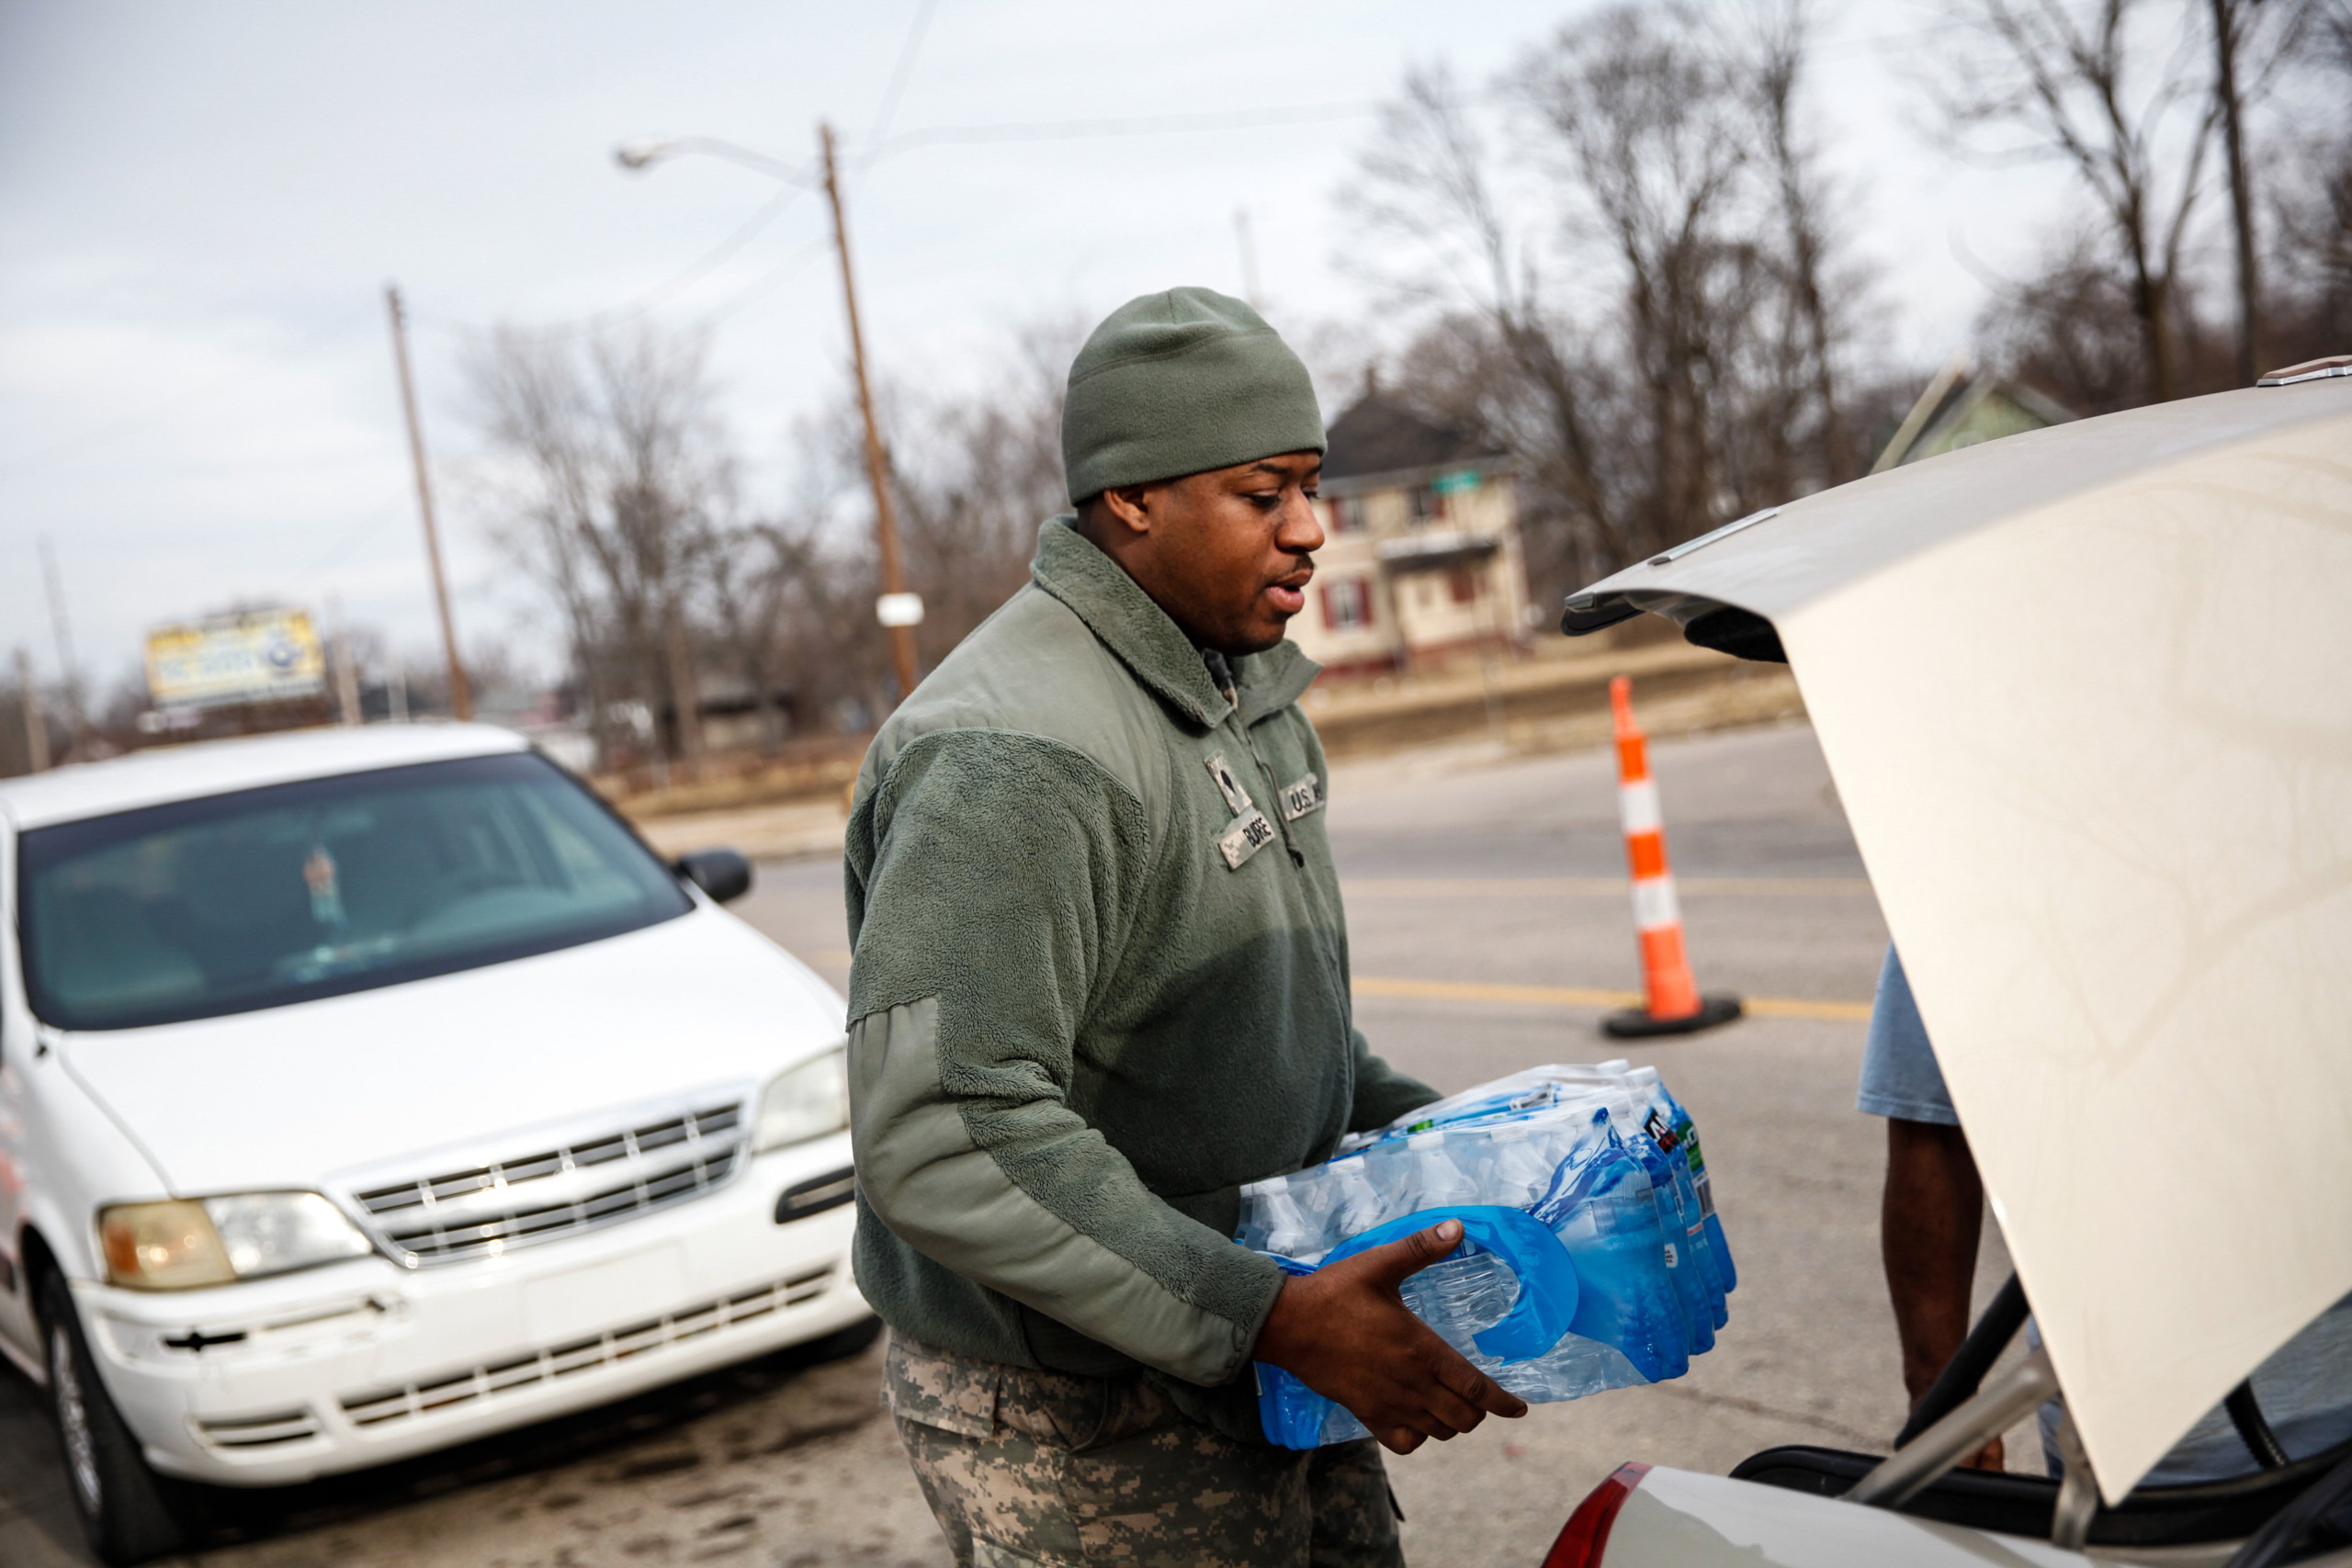 FLINT, MI - FEBRUARY 7:  Army National Guard Spc. Terence Burse carries bottled water out to the car for a resident on February 7, 2016 in Flint, Michigan. Months ago the city told citizens they could use tap water if they boiled it first, but now say it must be filtered to remove lead.  (Photo by Sarah Rice/Getty Images)